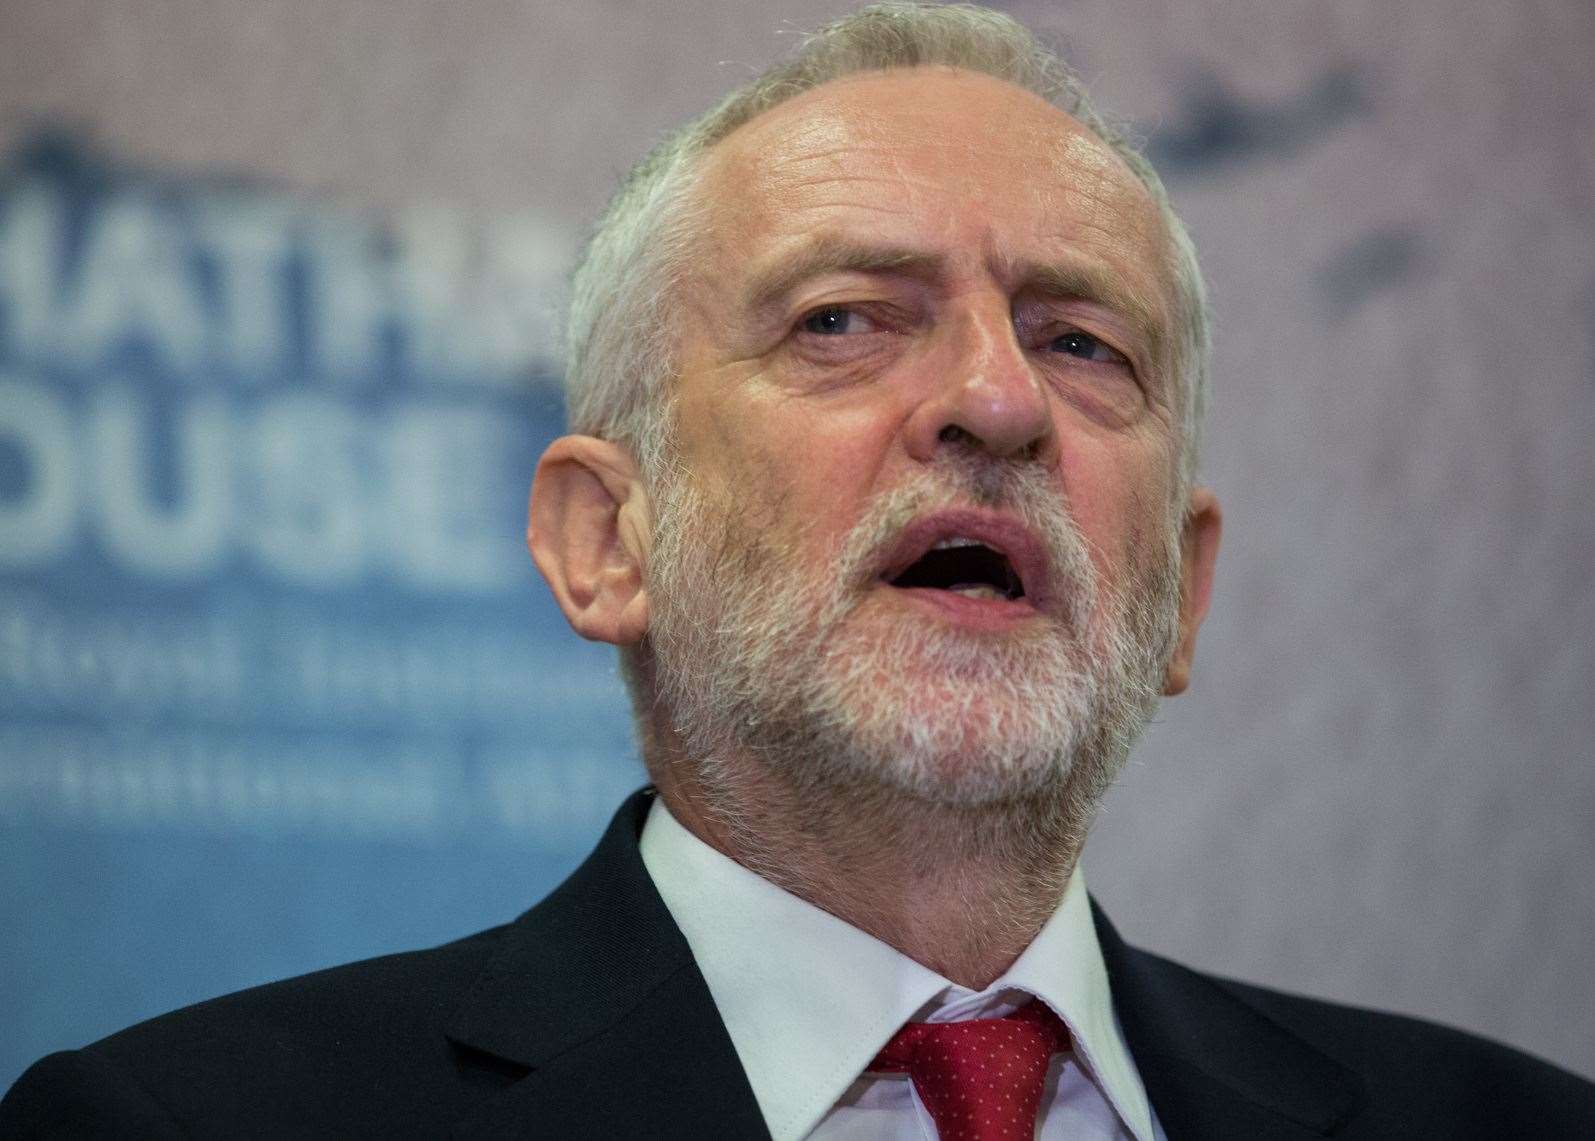 Jeremy Corbyn's position on Brexit has been criticised